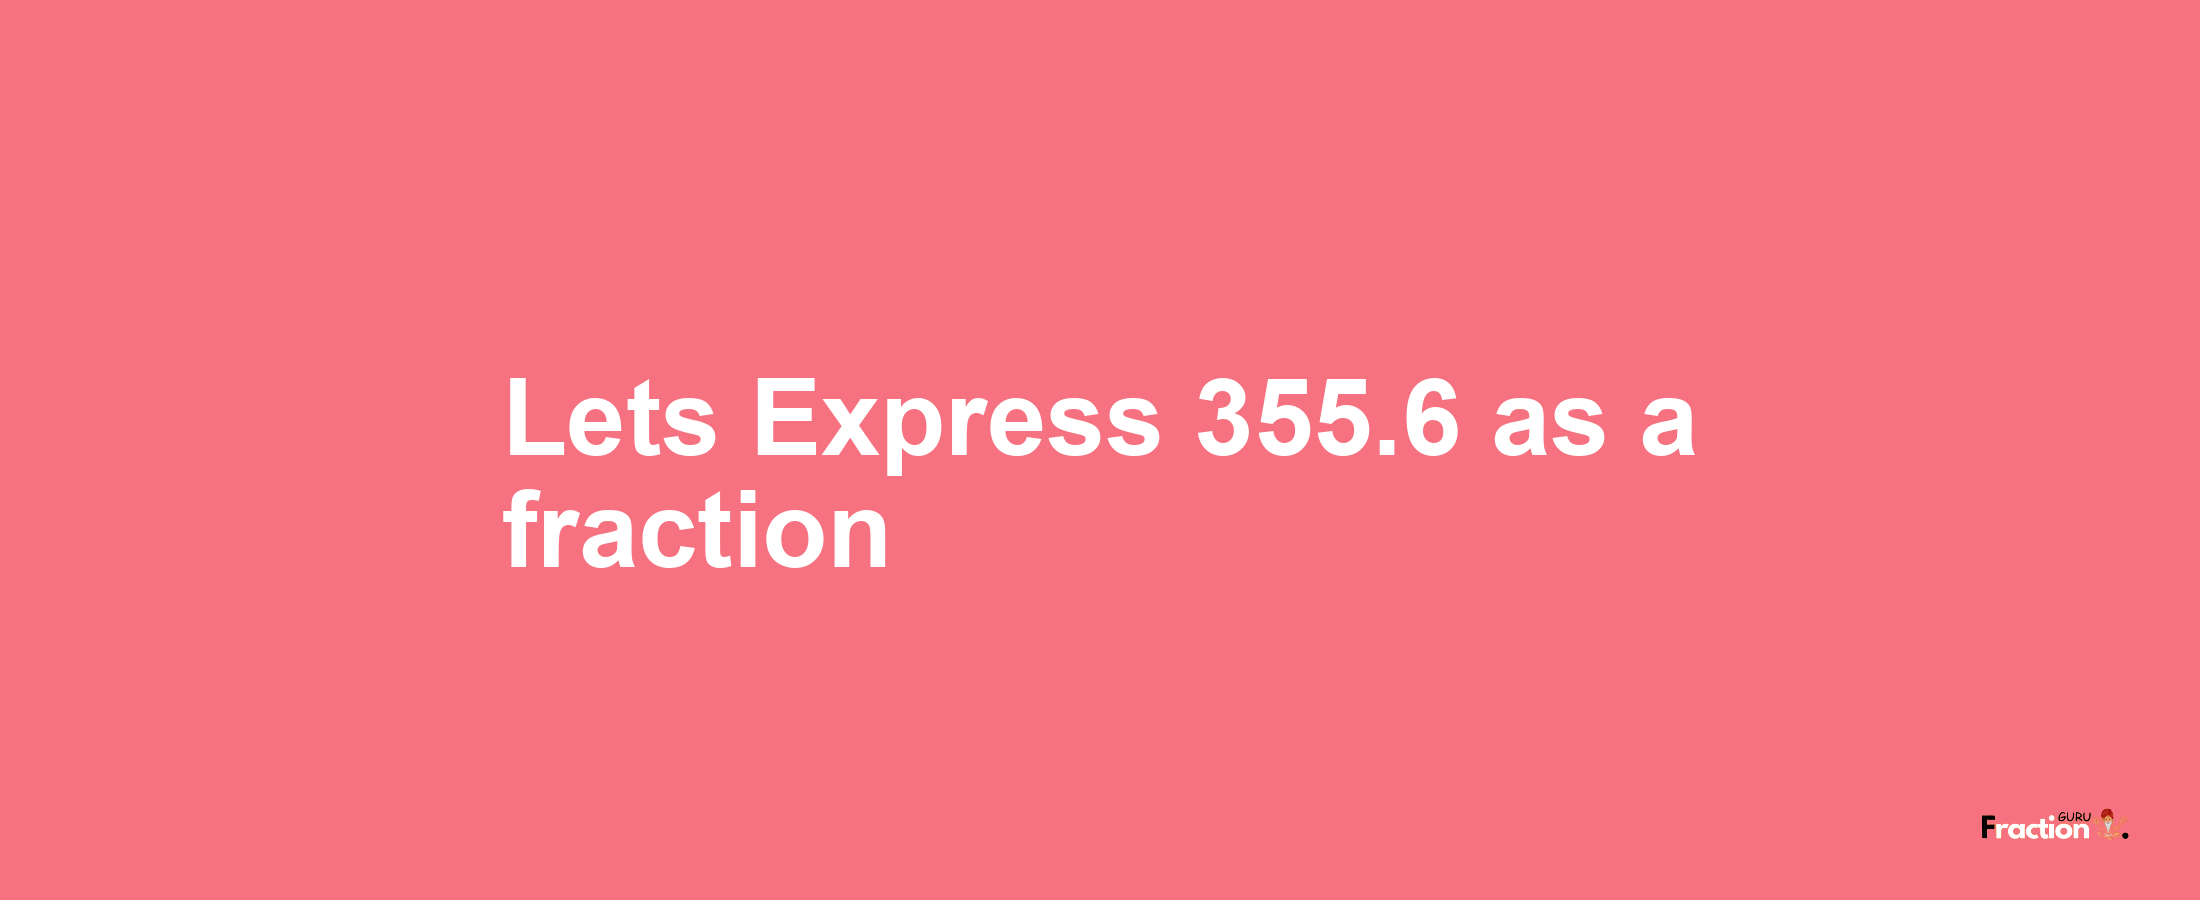 Lets Express 355.6 as afraction